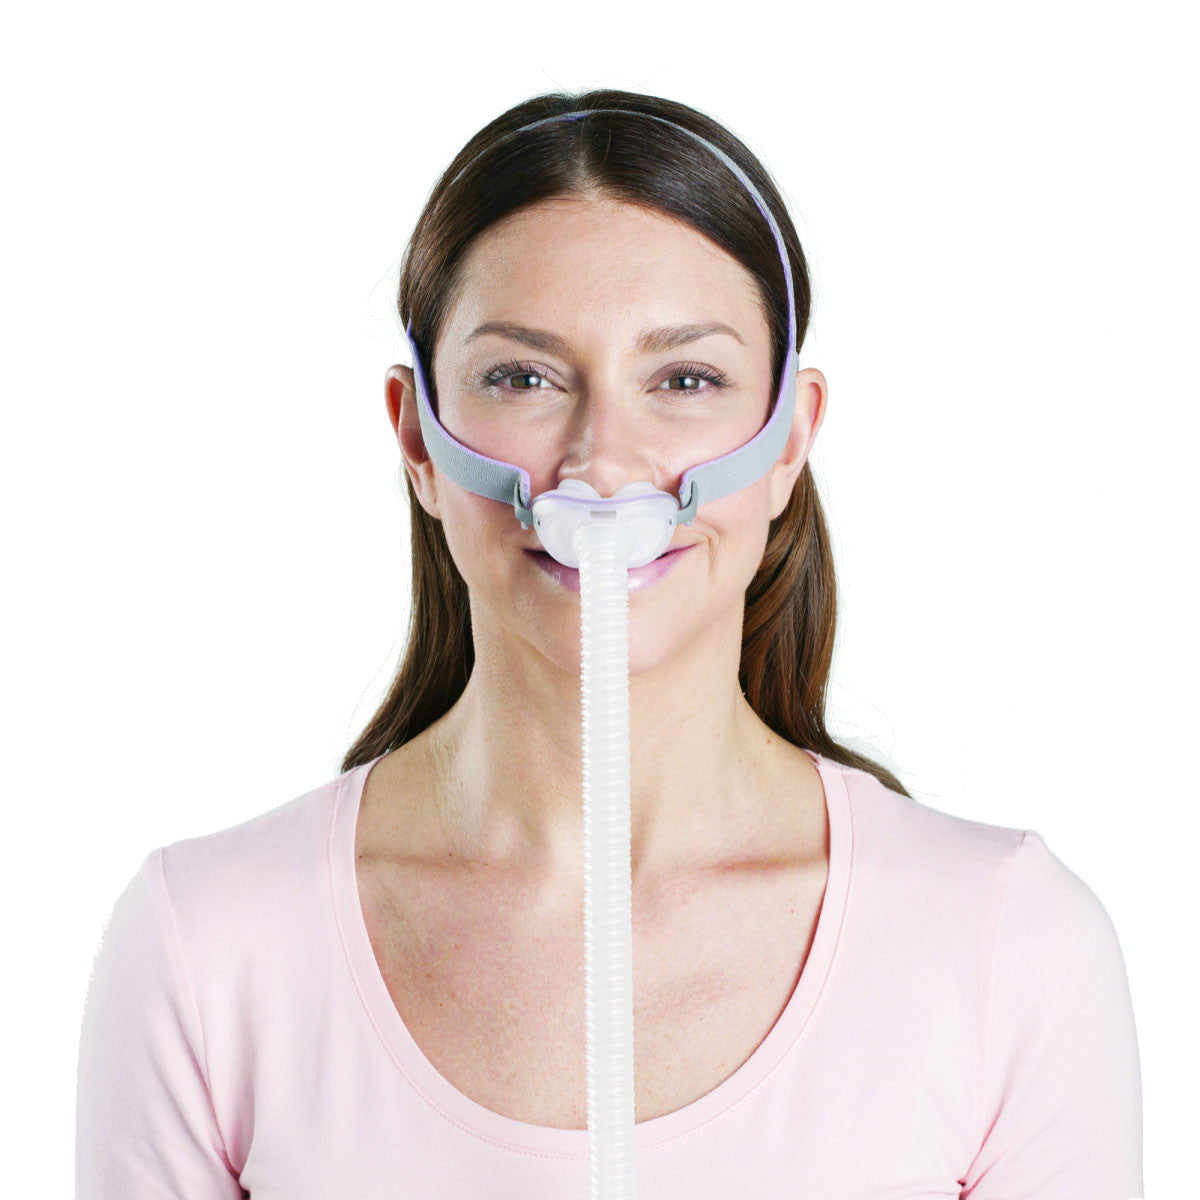 Resmed Airfit P10 For Her Nasal Pillow Mask Ref 62910 Locatel Health And Wellness Online Store 5598